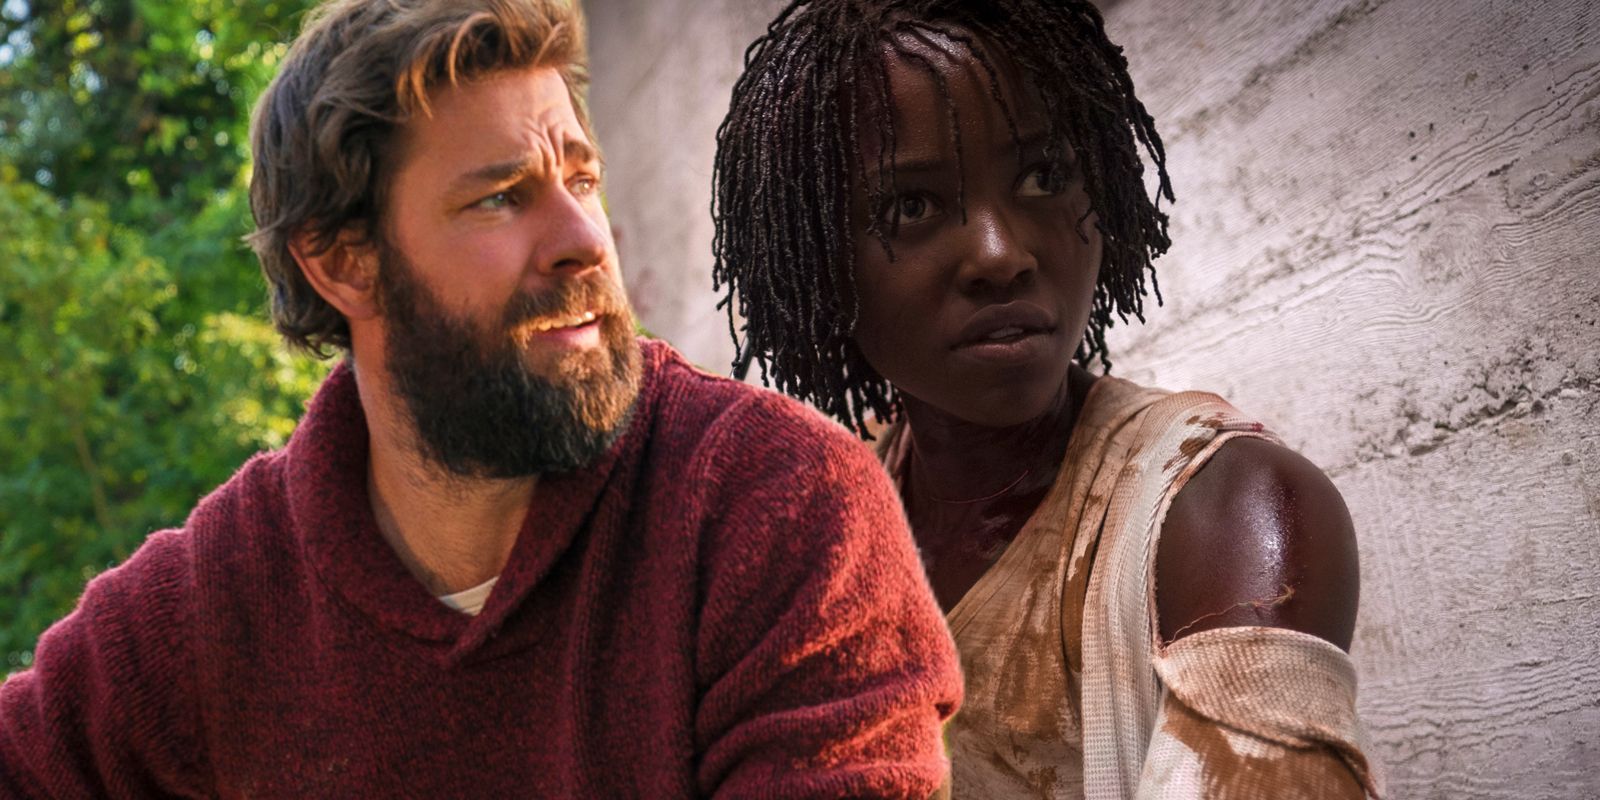 John Krasinski in A Quiet Place and Lupita Nyong'o in Us